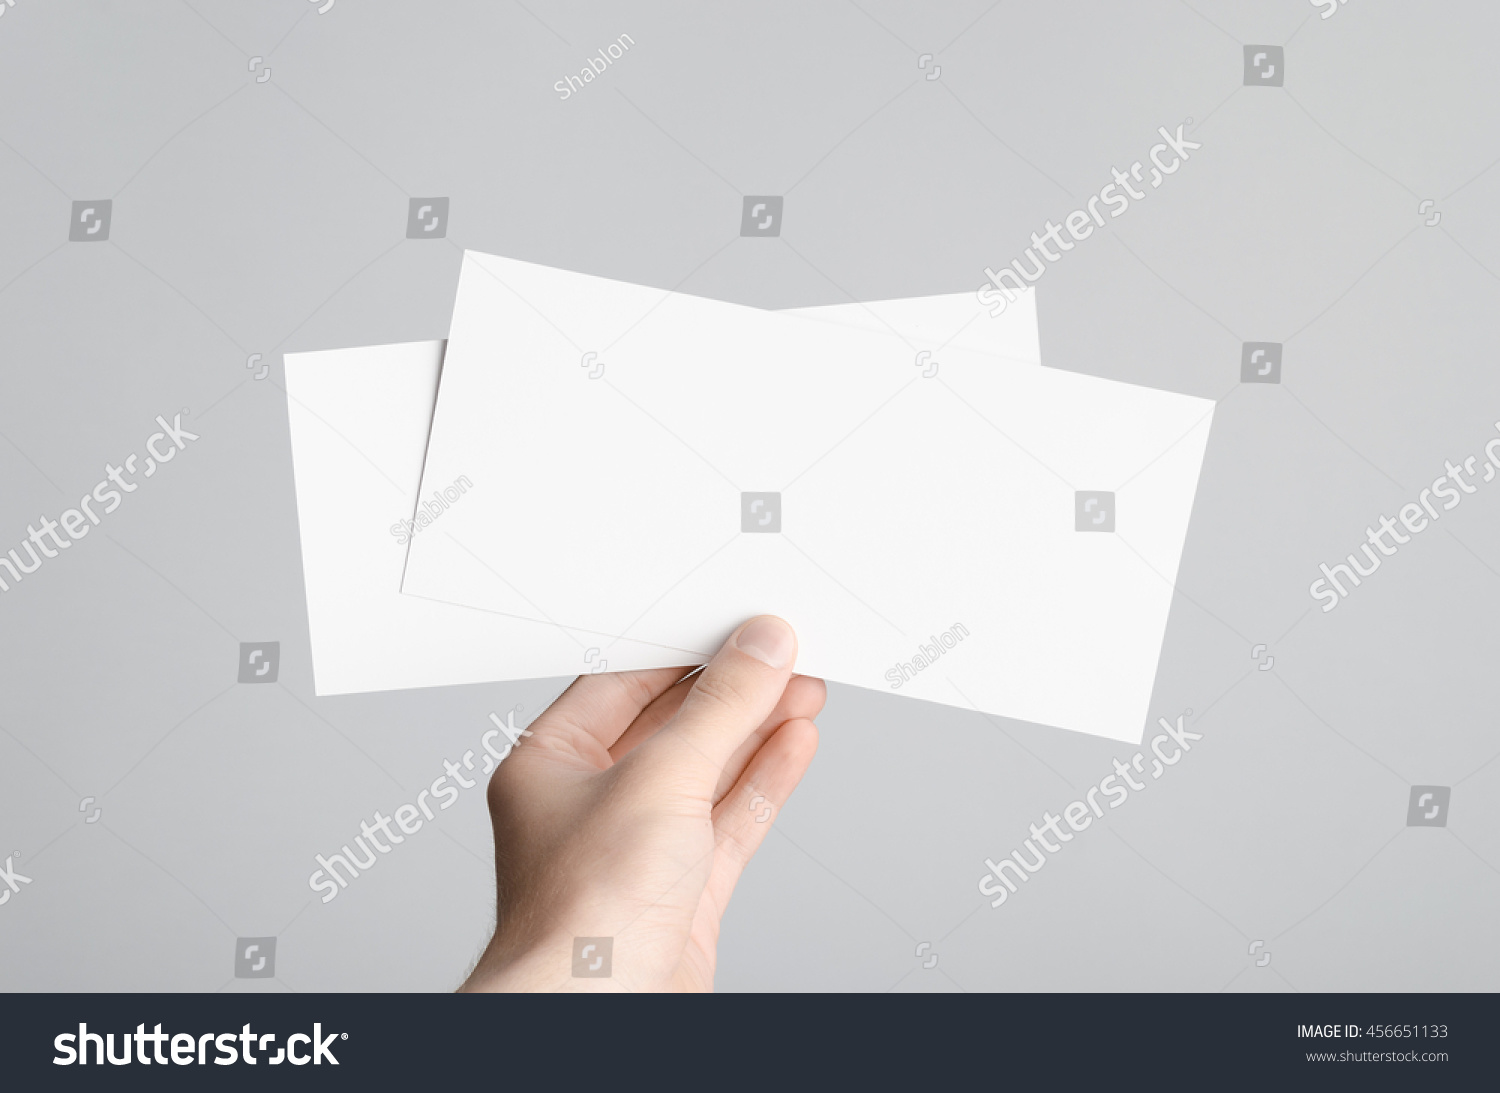 DL Flyer Mock-Up - Male hands holding blank flyers on a gray background. #456651133